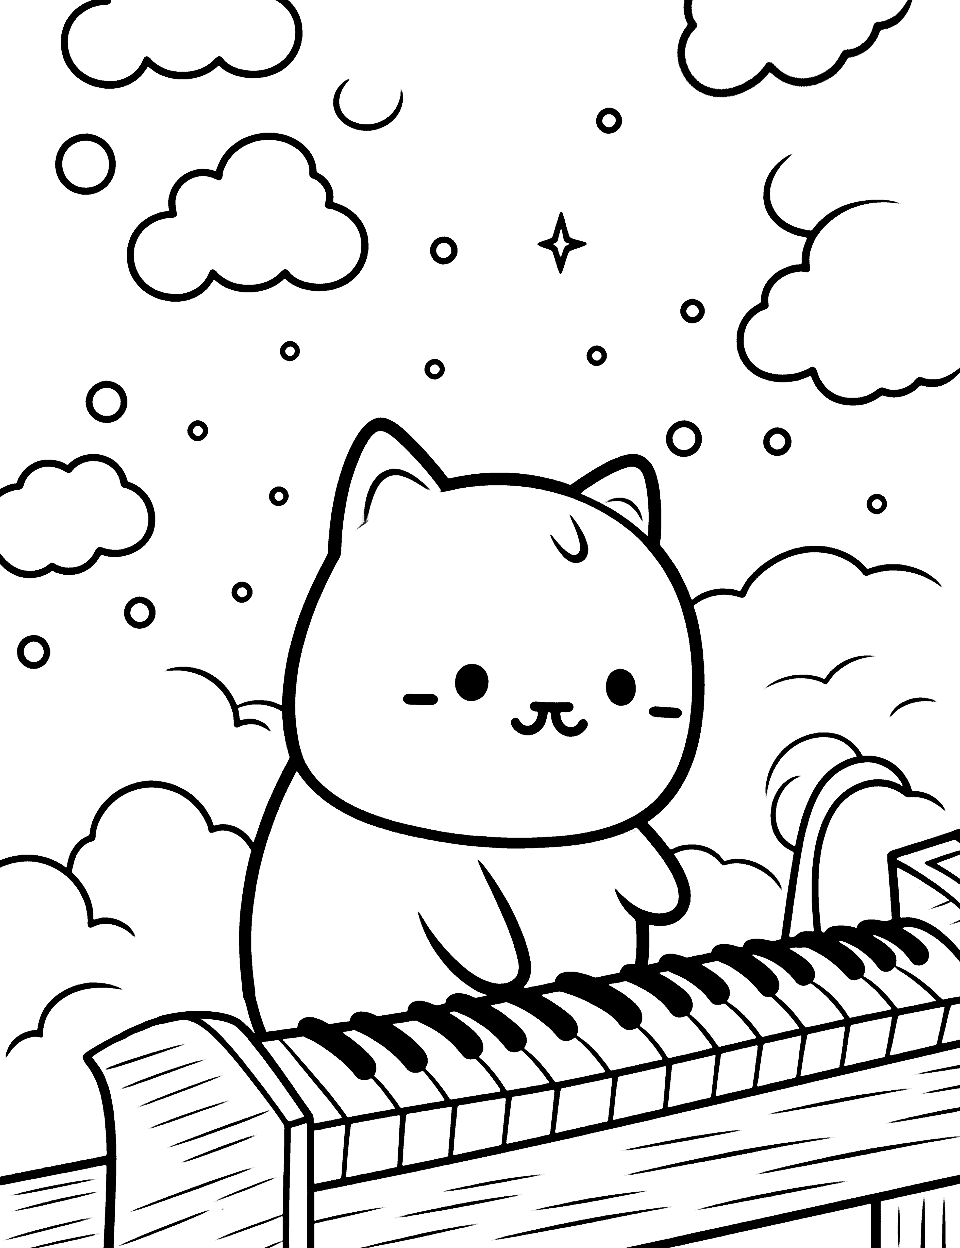 Nyan Cat's Musical Melody Kawaii Coloring Page - Nyan Cat playing a magical melody on a colorful piano in the sky.